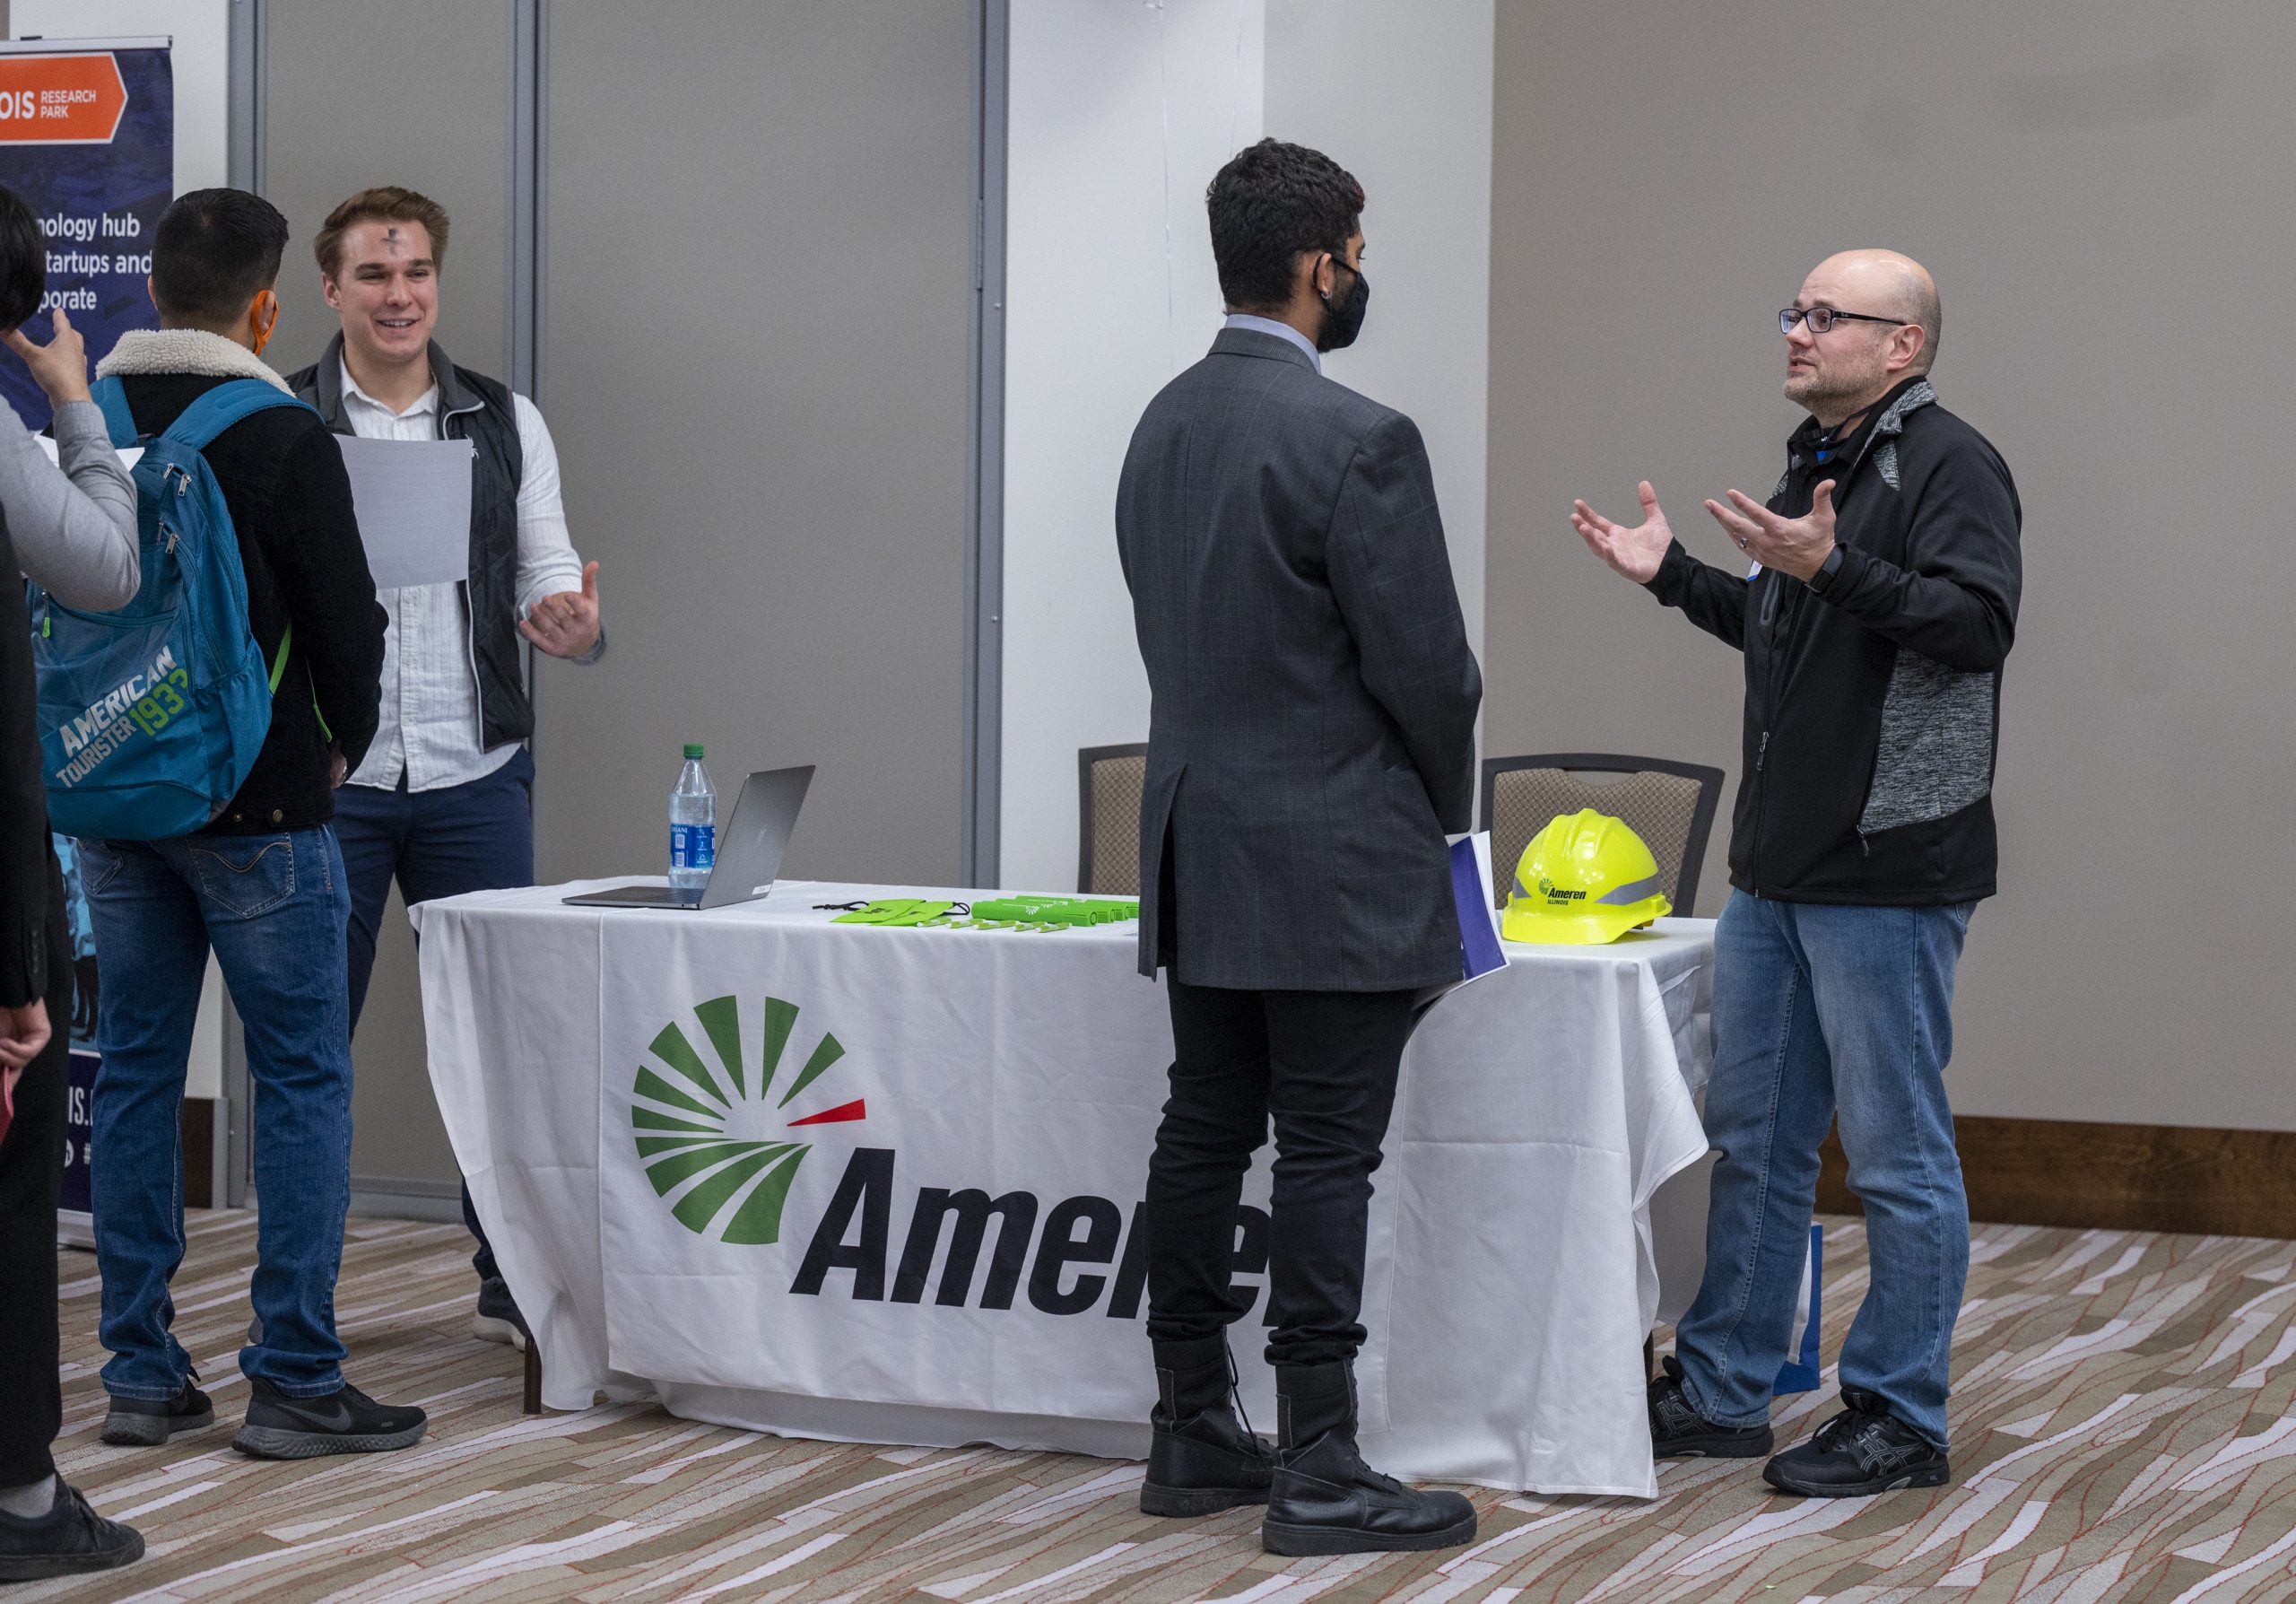 Ameren booth at the Research Park Career Fair.